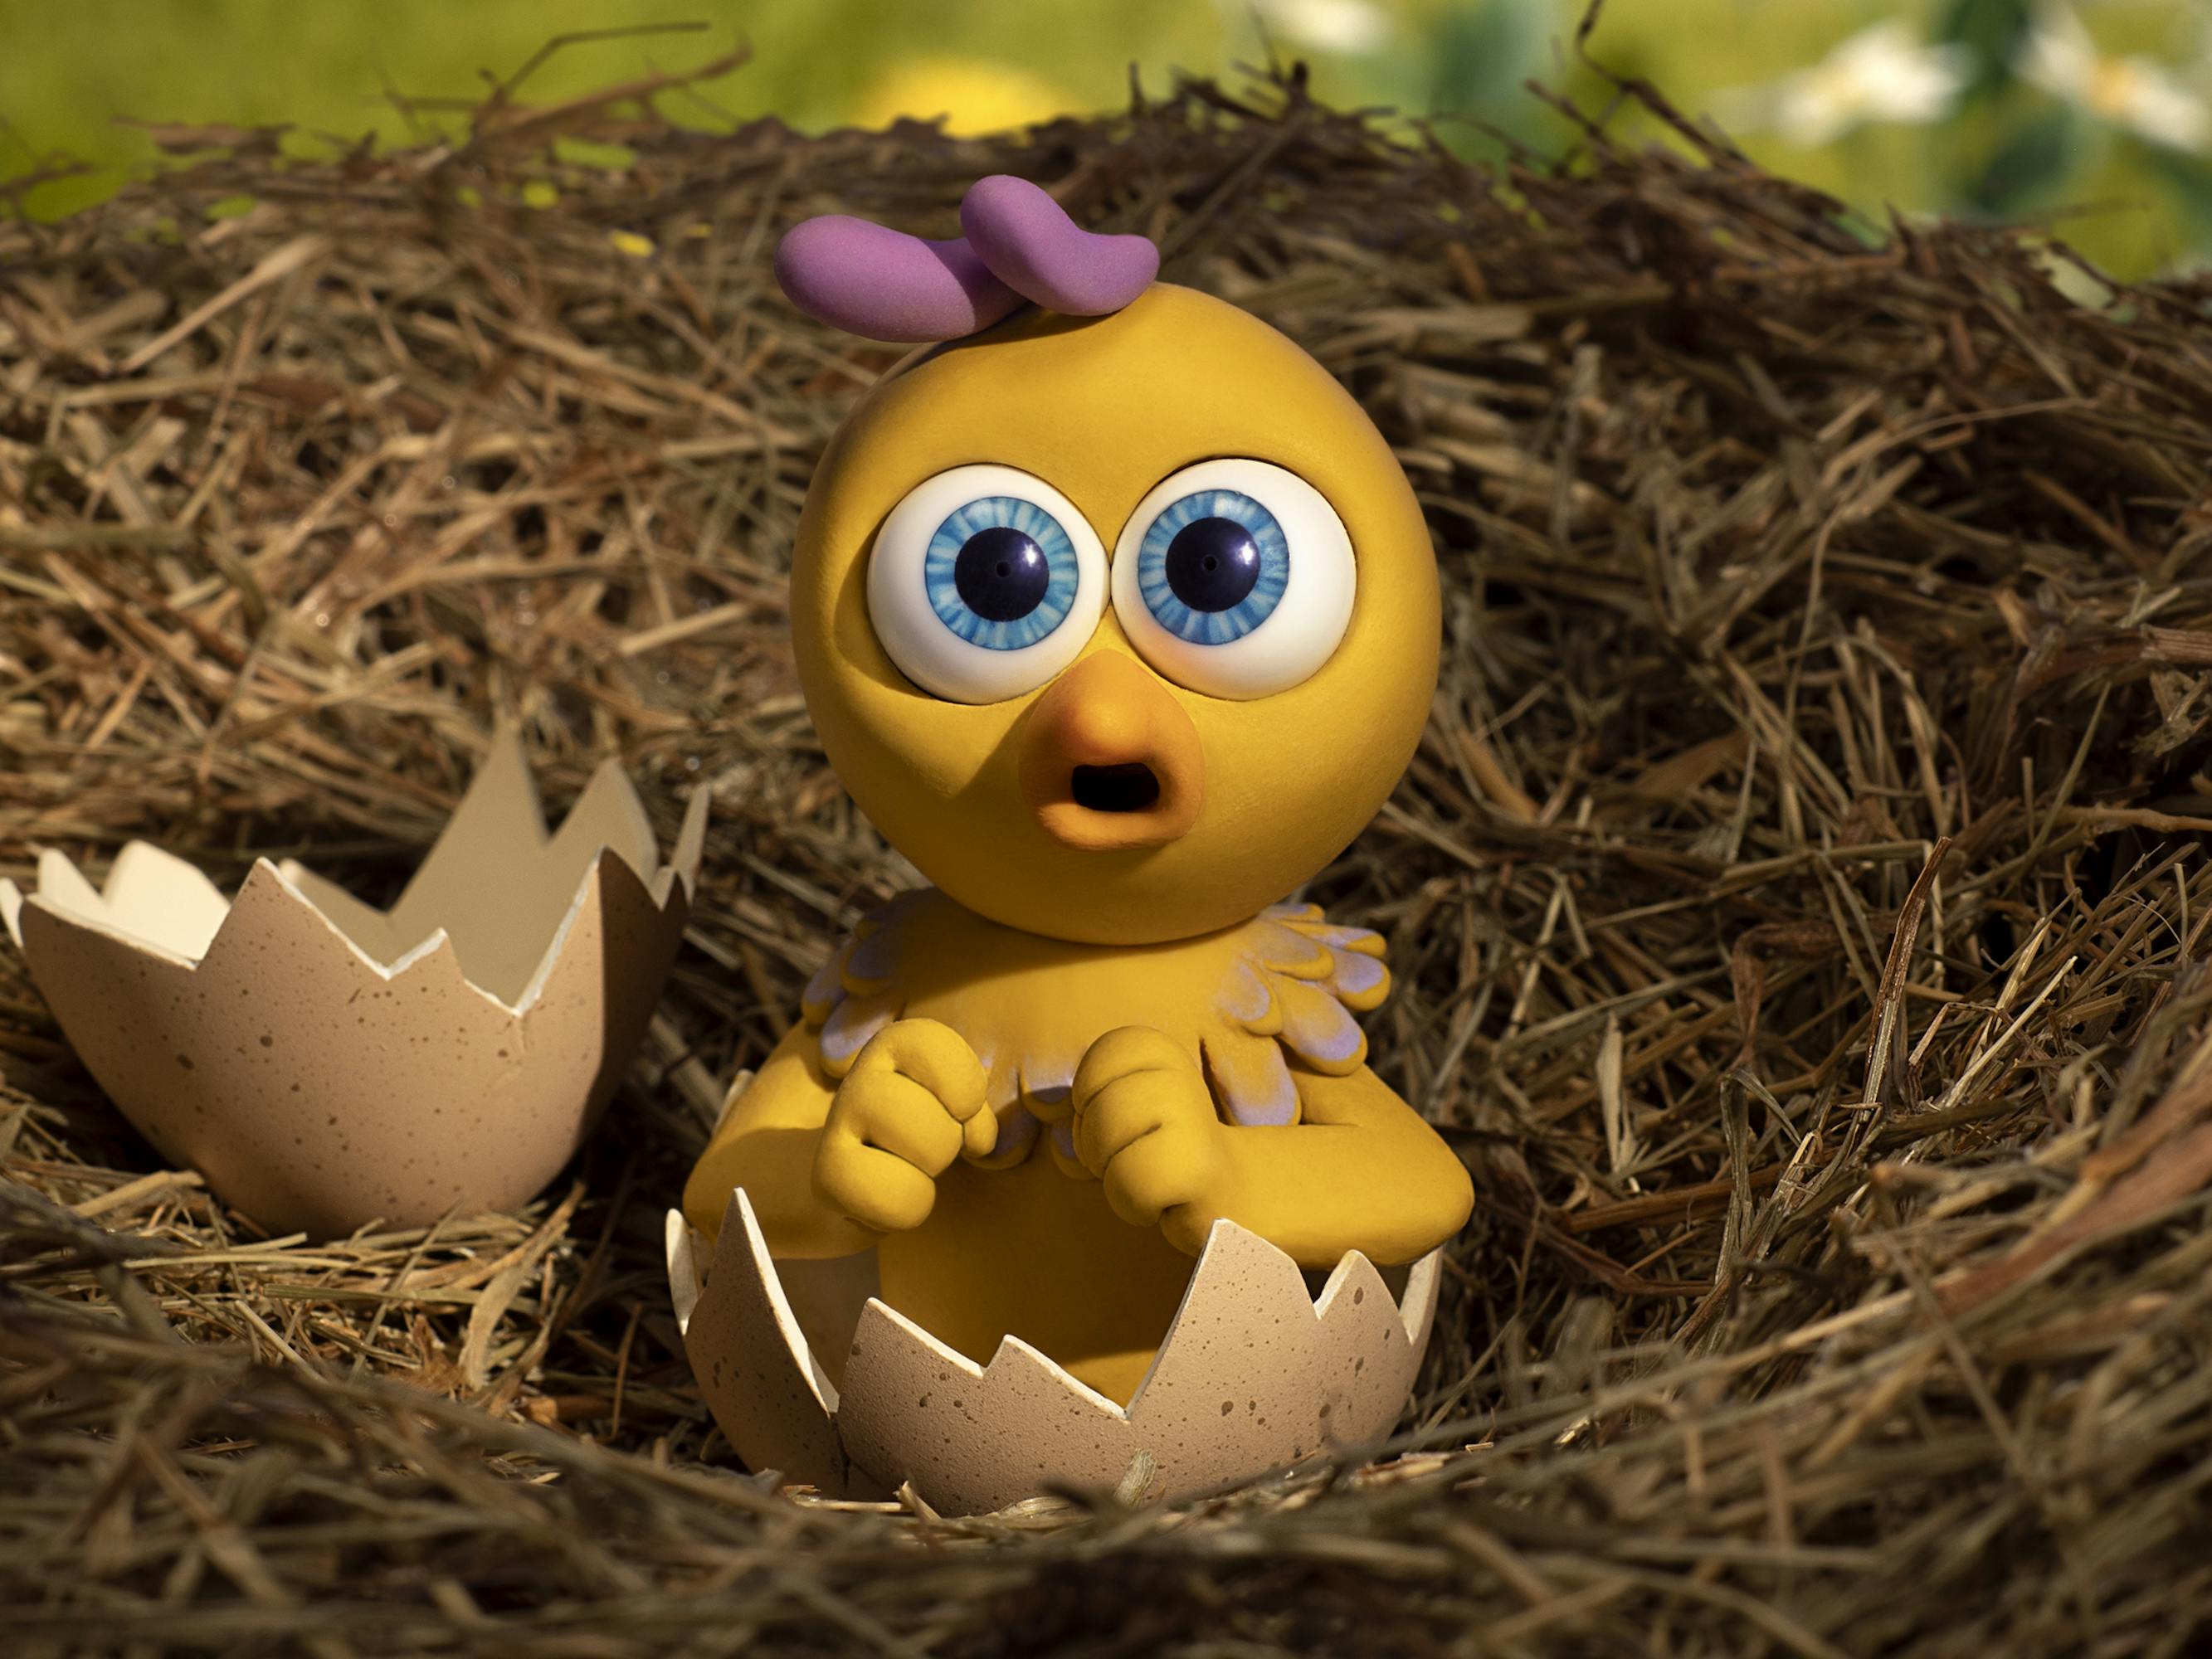 Molly (Bella Ramsey) comes out of an egg in a little nest.